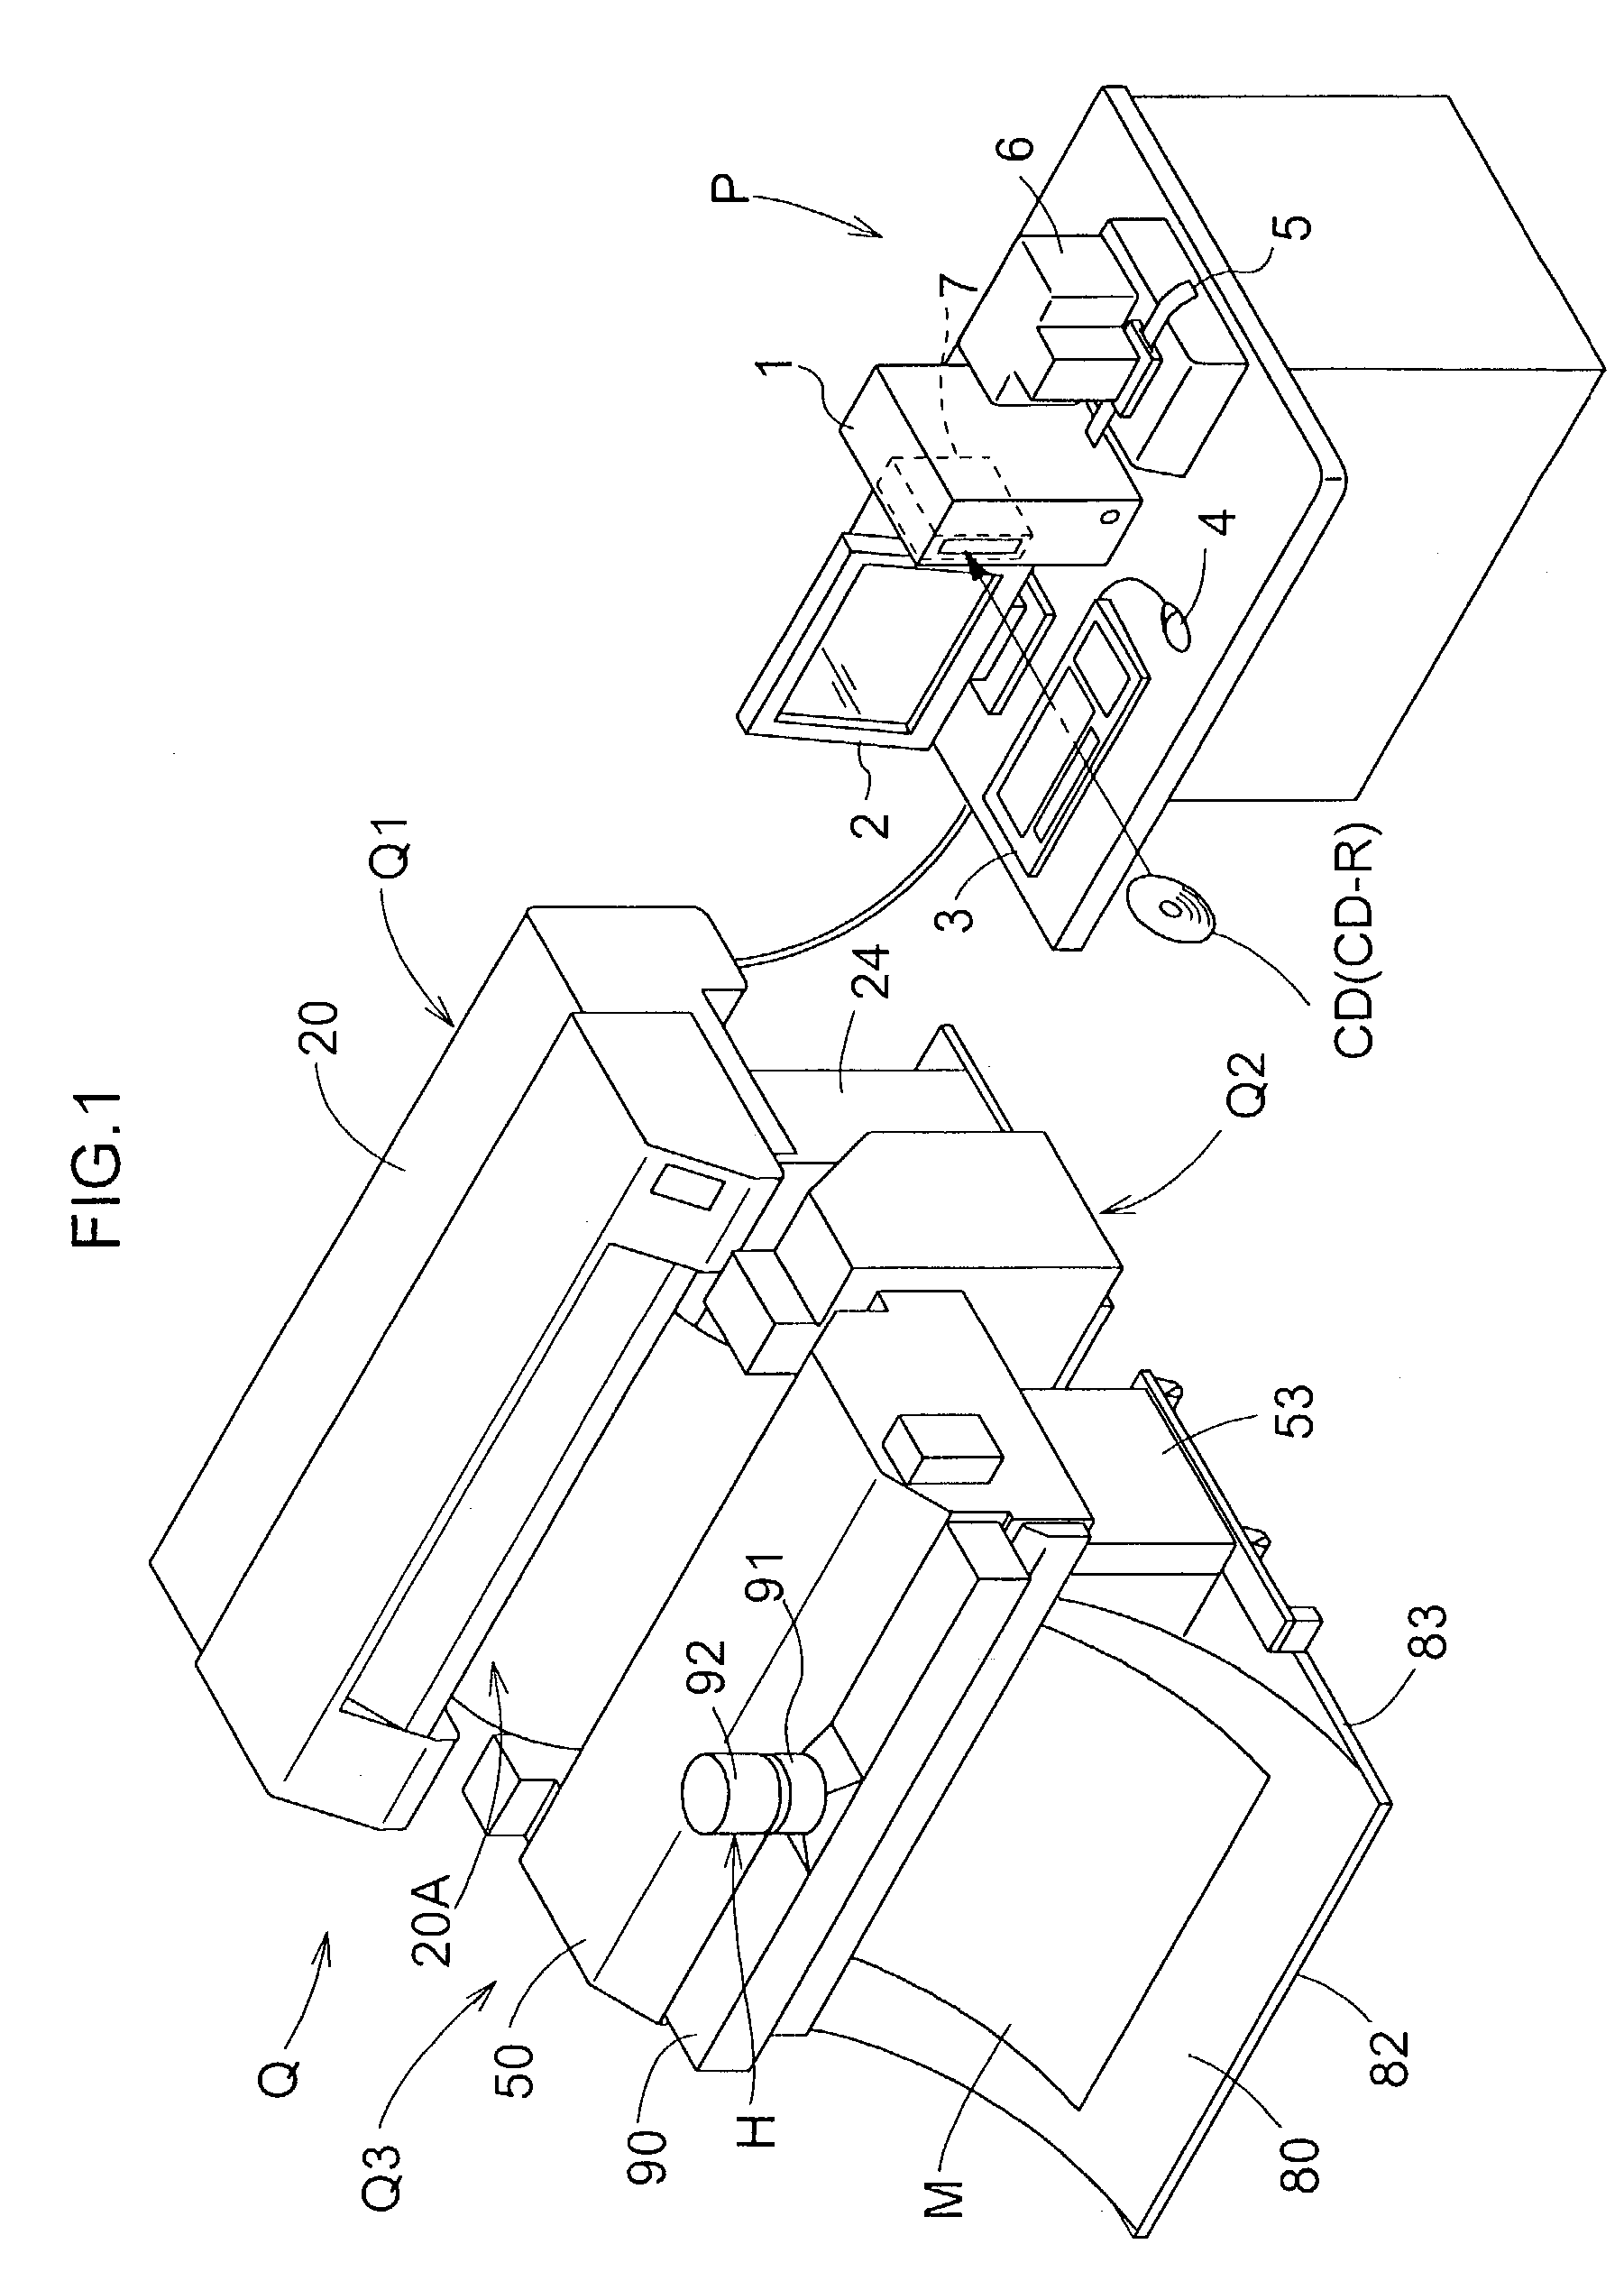 Heat fixing apparatus for sublimating and fixing sublimating ink to recording medium